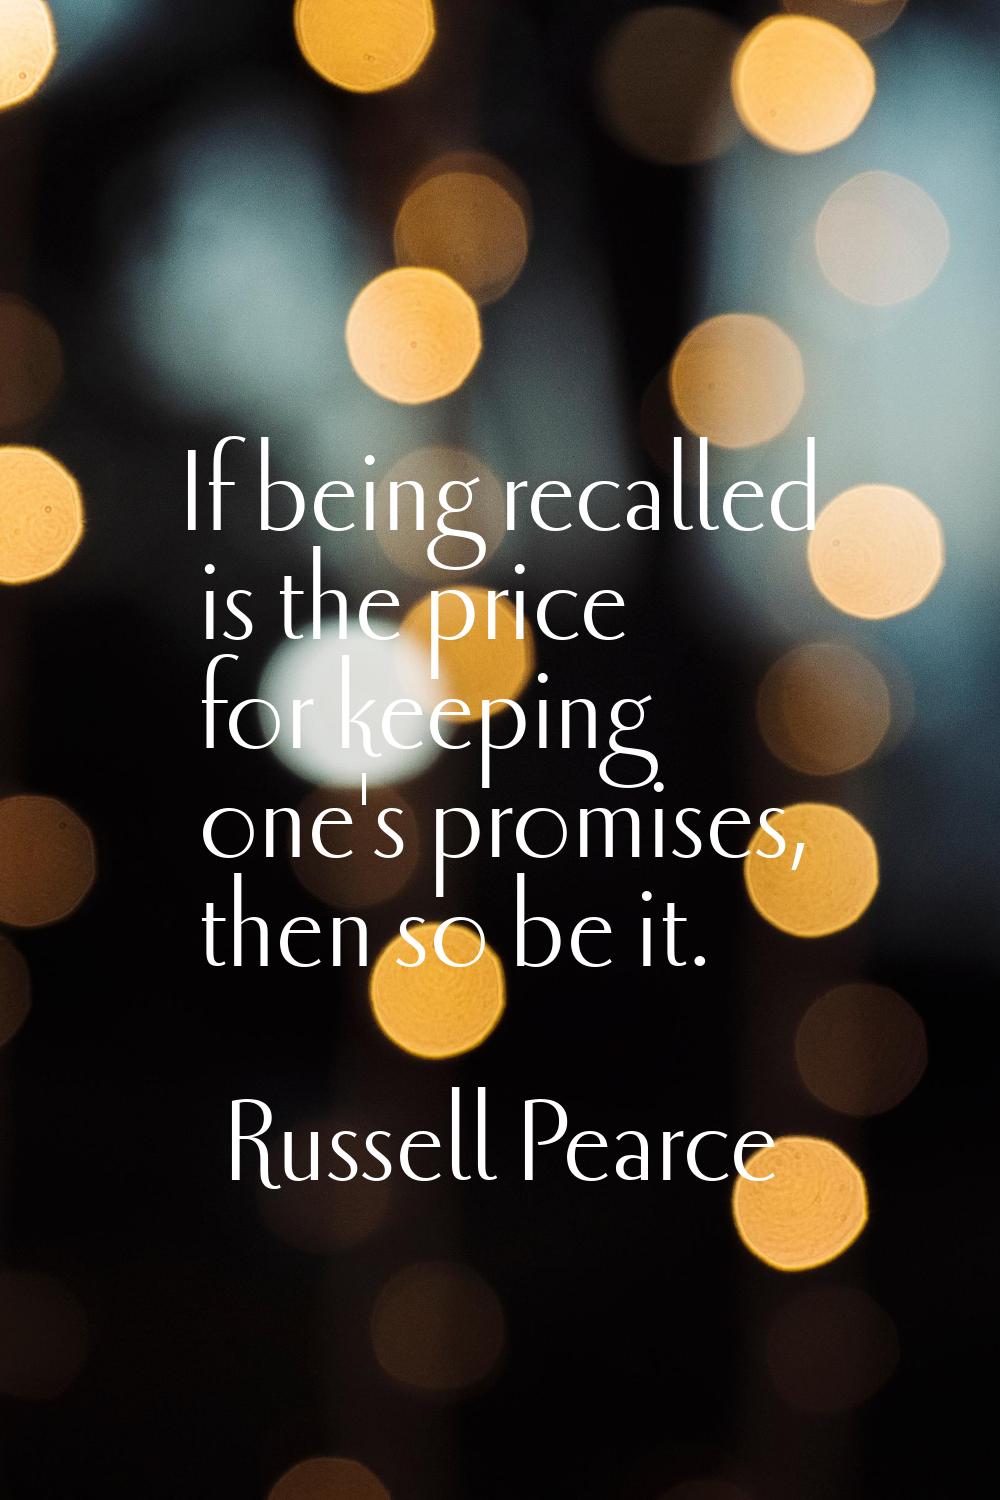 If being recalled is the price for keeping one's promises, then so be it.